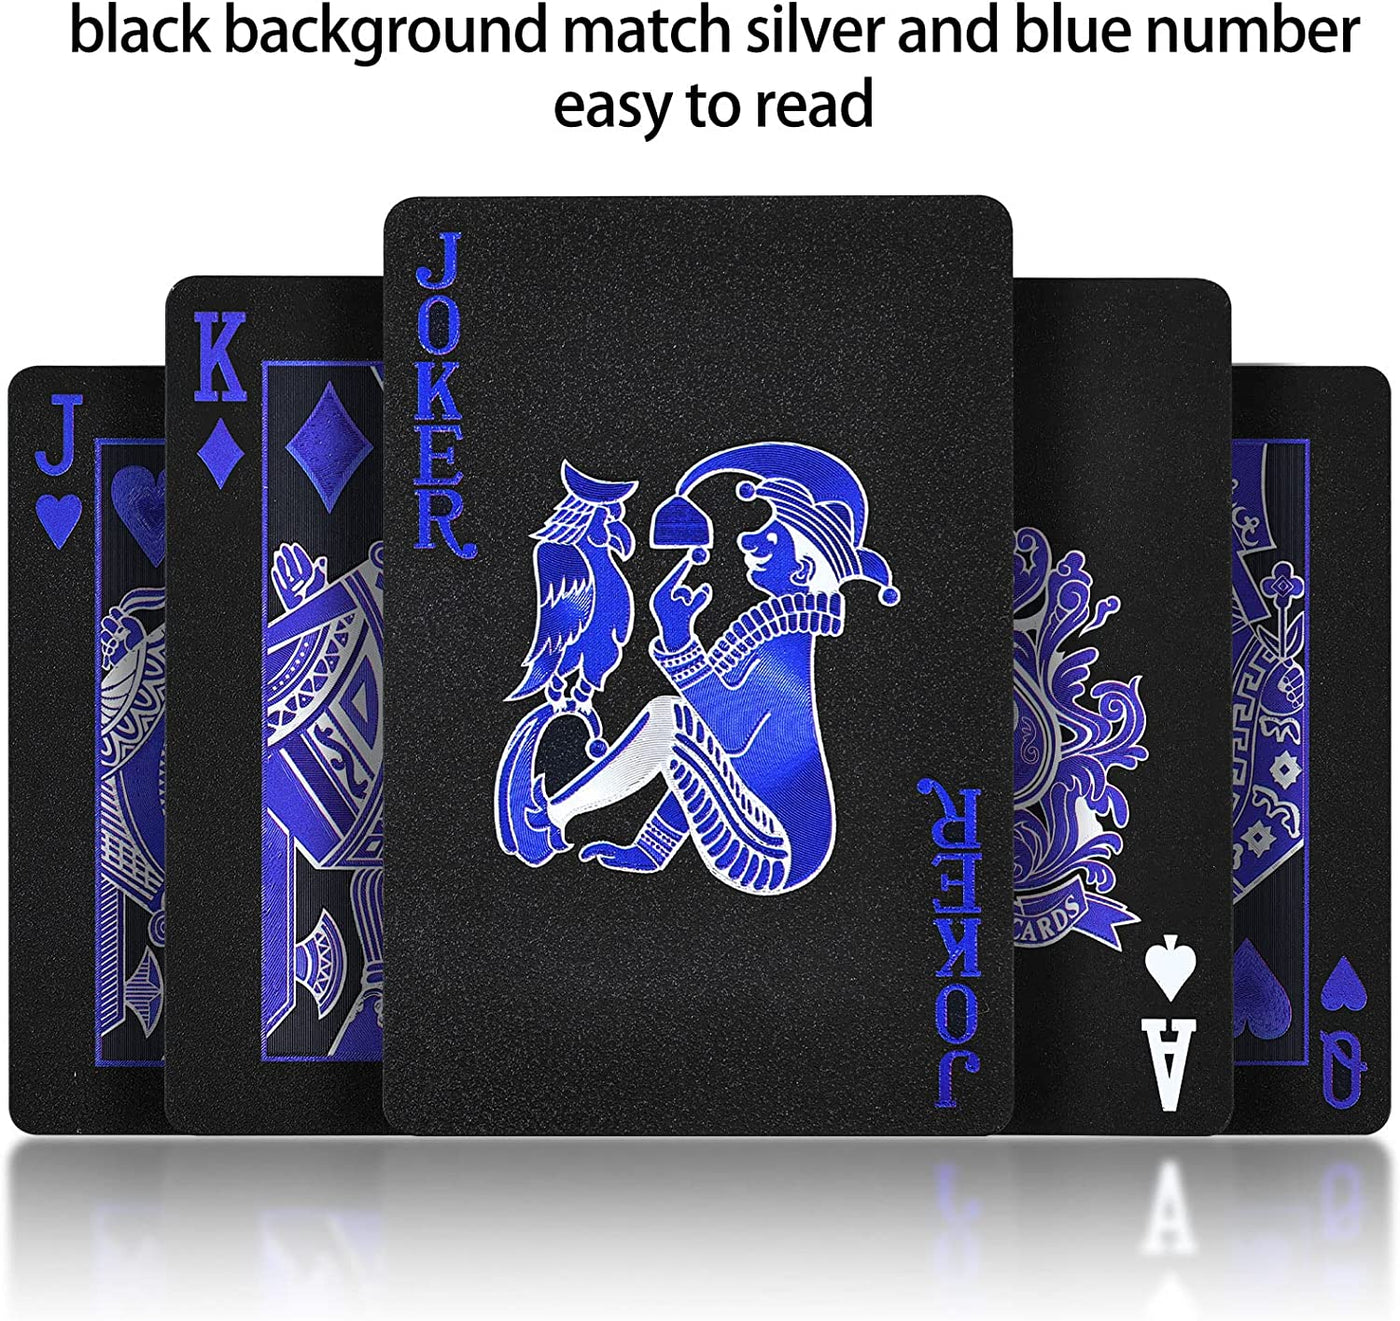  Black Plastic Playing Cards , Waterproof Poker Cards, PET Playing Cards with Box Suitable for Pool, Beach, Camping, Party, Family or Friend Card Games